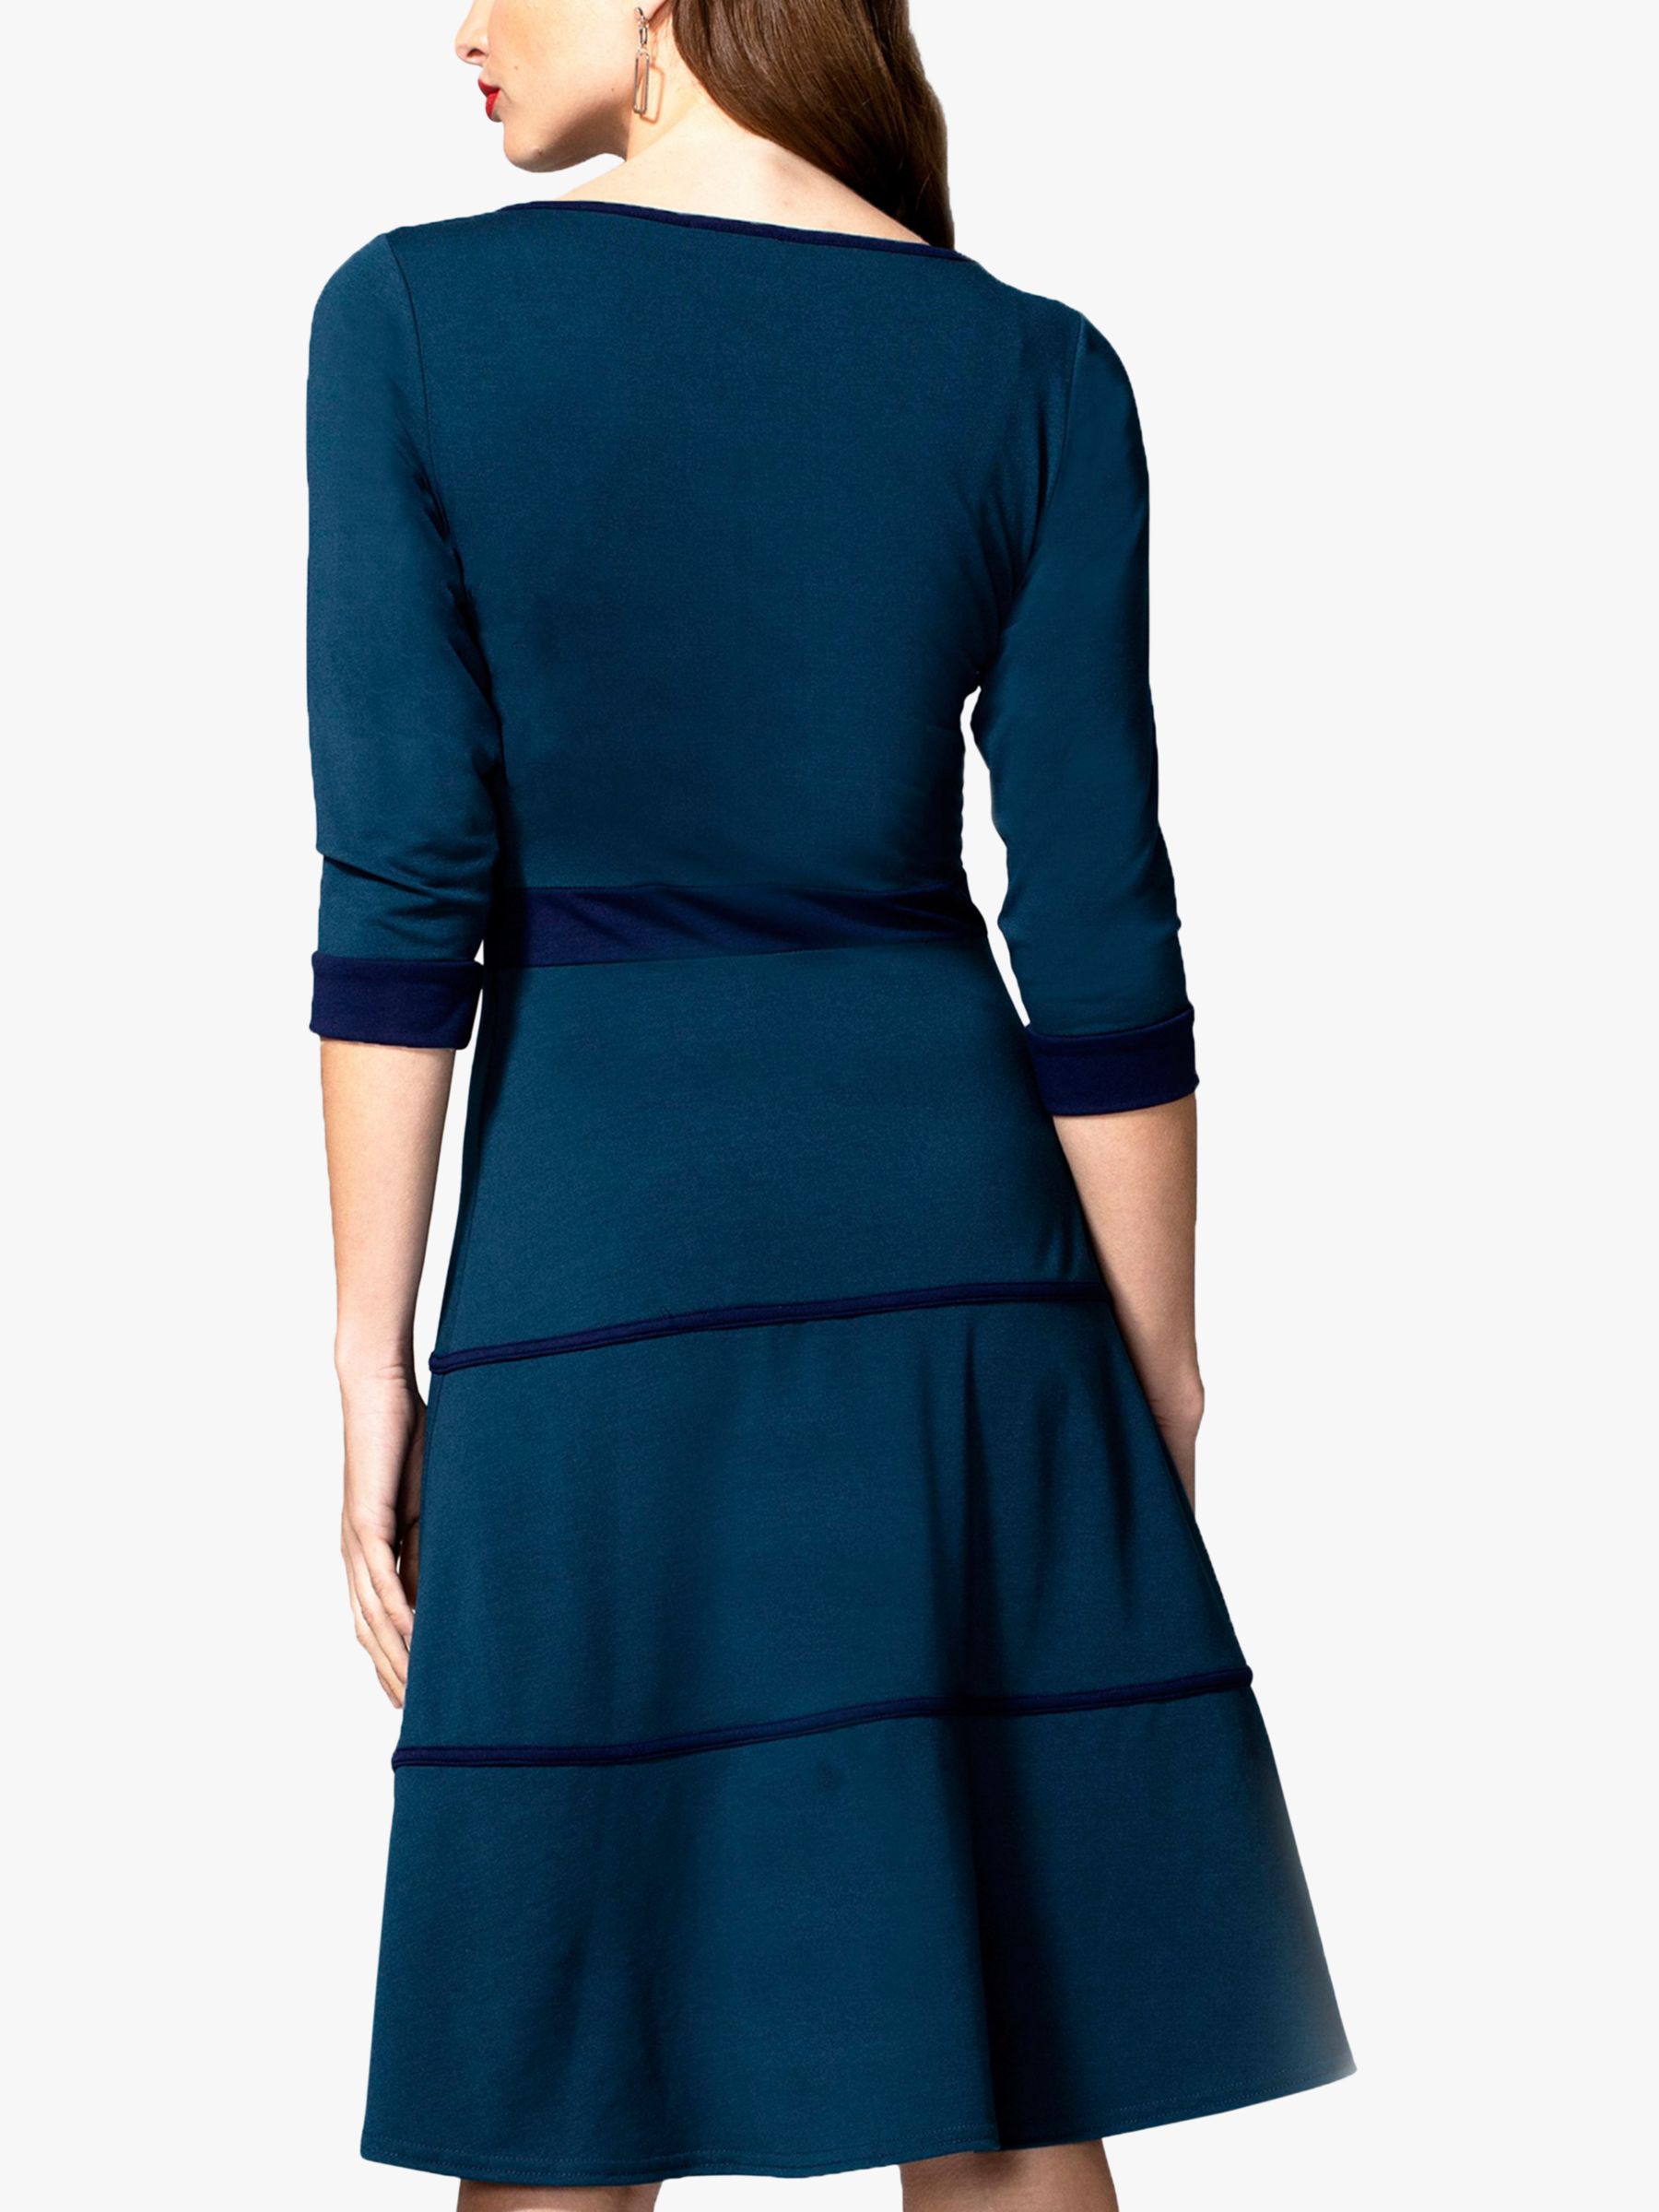 Buy HotSquash Contrast Ribbing Tiered Dress Online at johnlewis.com